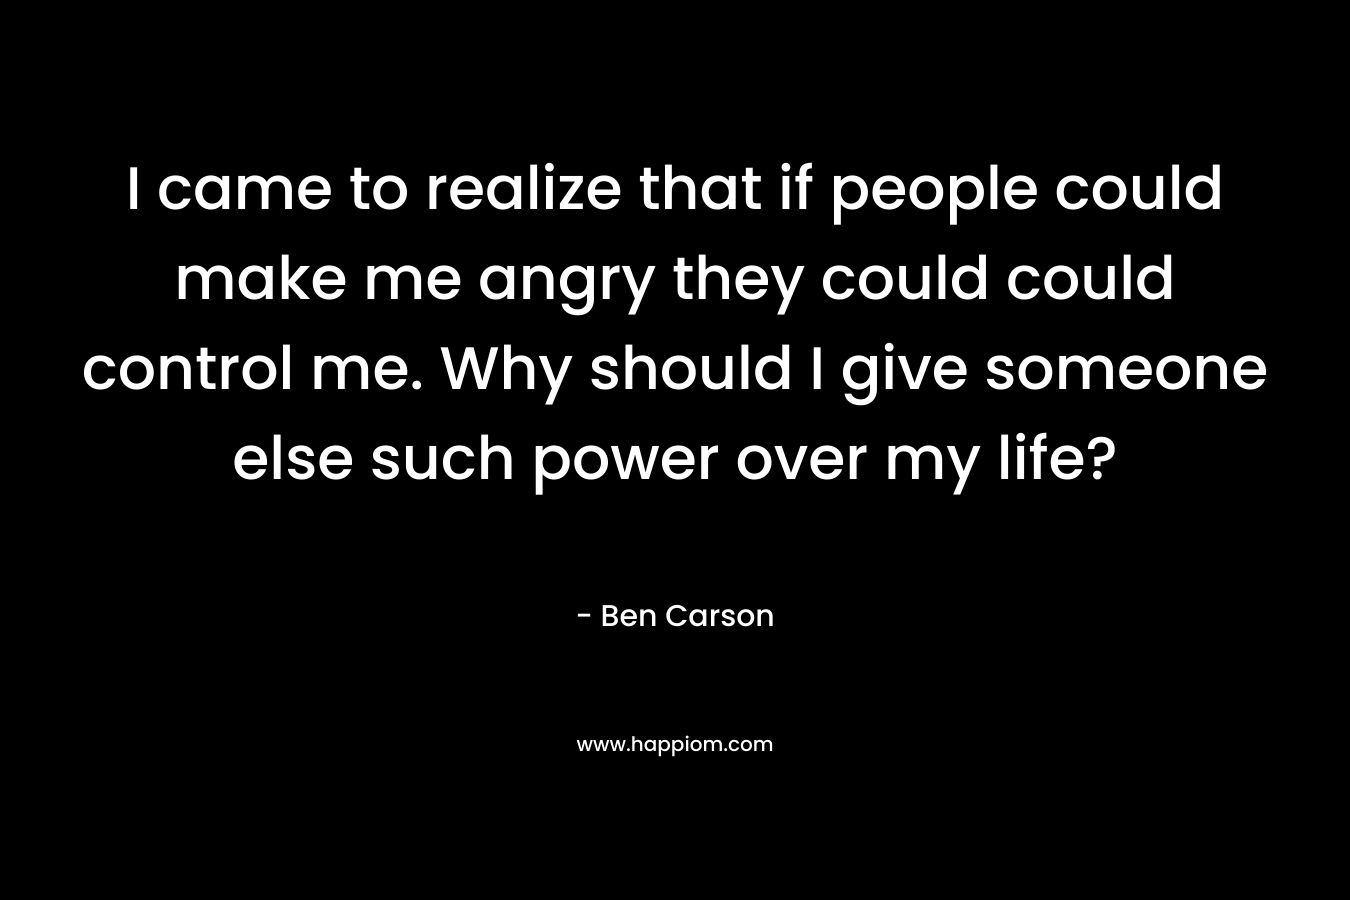 I came to realize that if people could make me angry they could could control me. Why should I give someone else such power over my life?